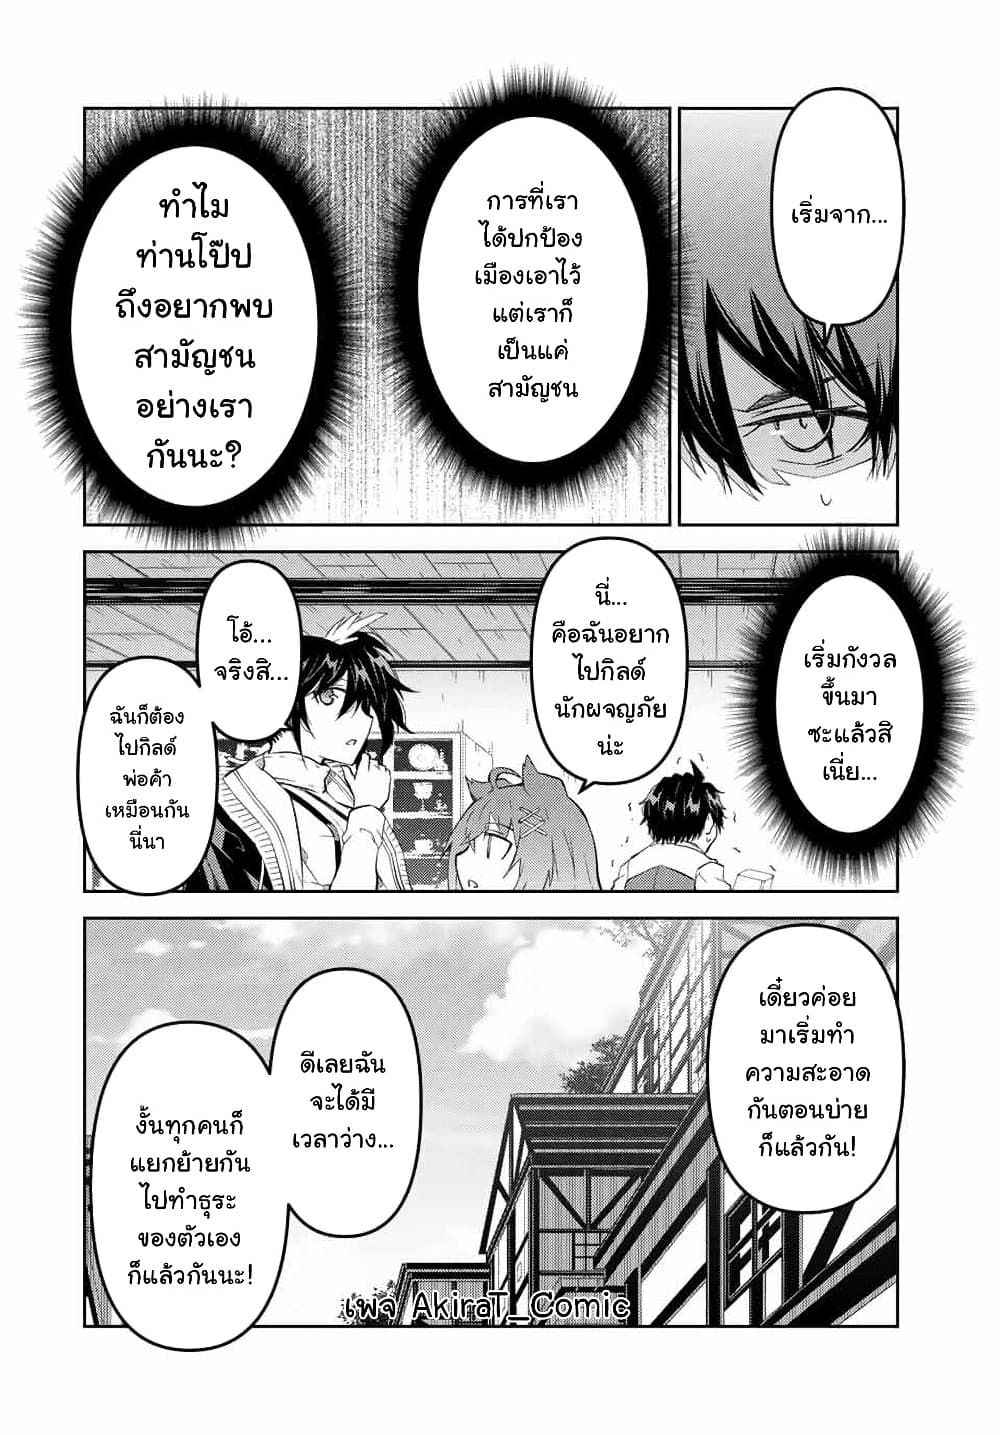 The Weakest Occupation "Blacksmith", but It's Actually the Strongest ช่างตีเหล็กอาชีพกระจอก? 68-68